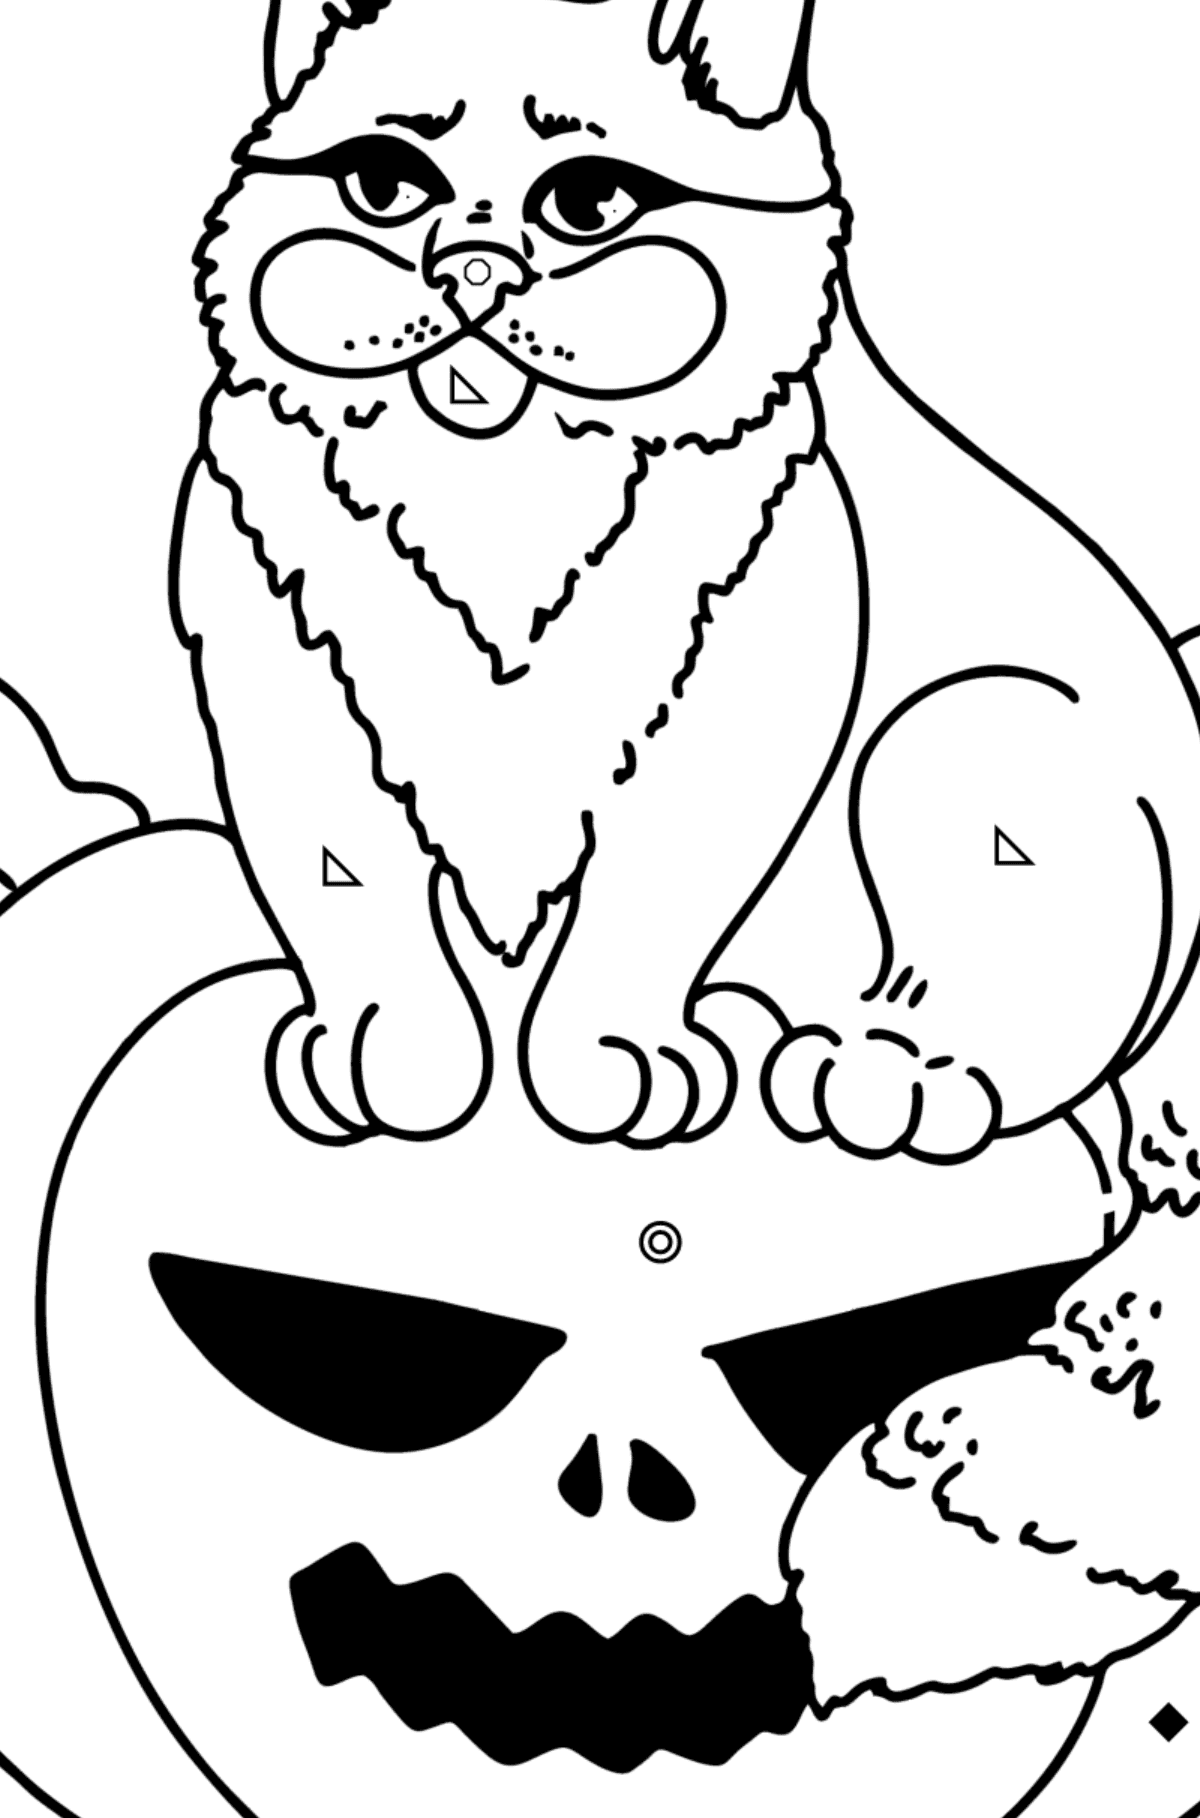 Halloween Cat coloring page - Coloring by Symbols and Geometric Shapes for Kids